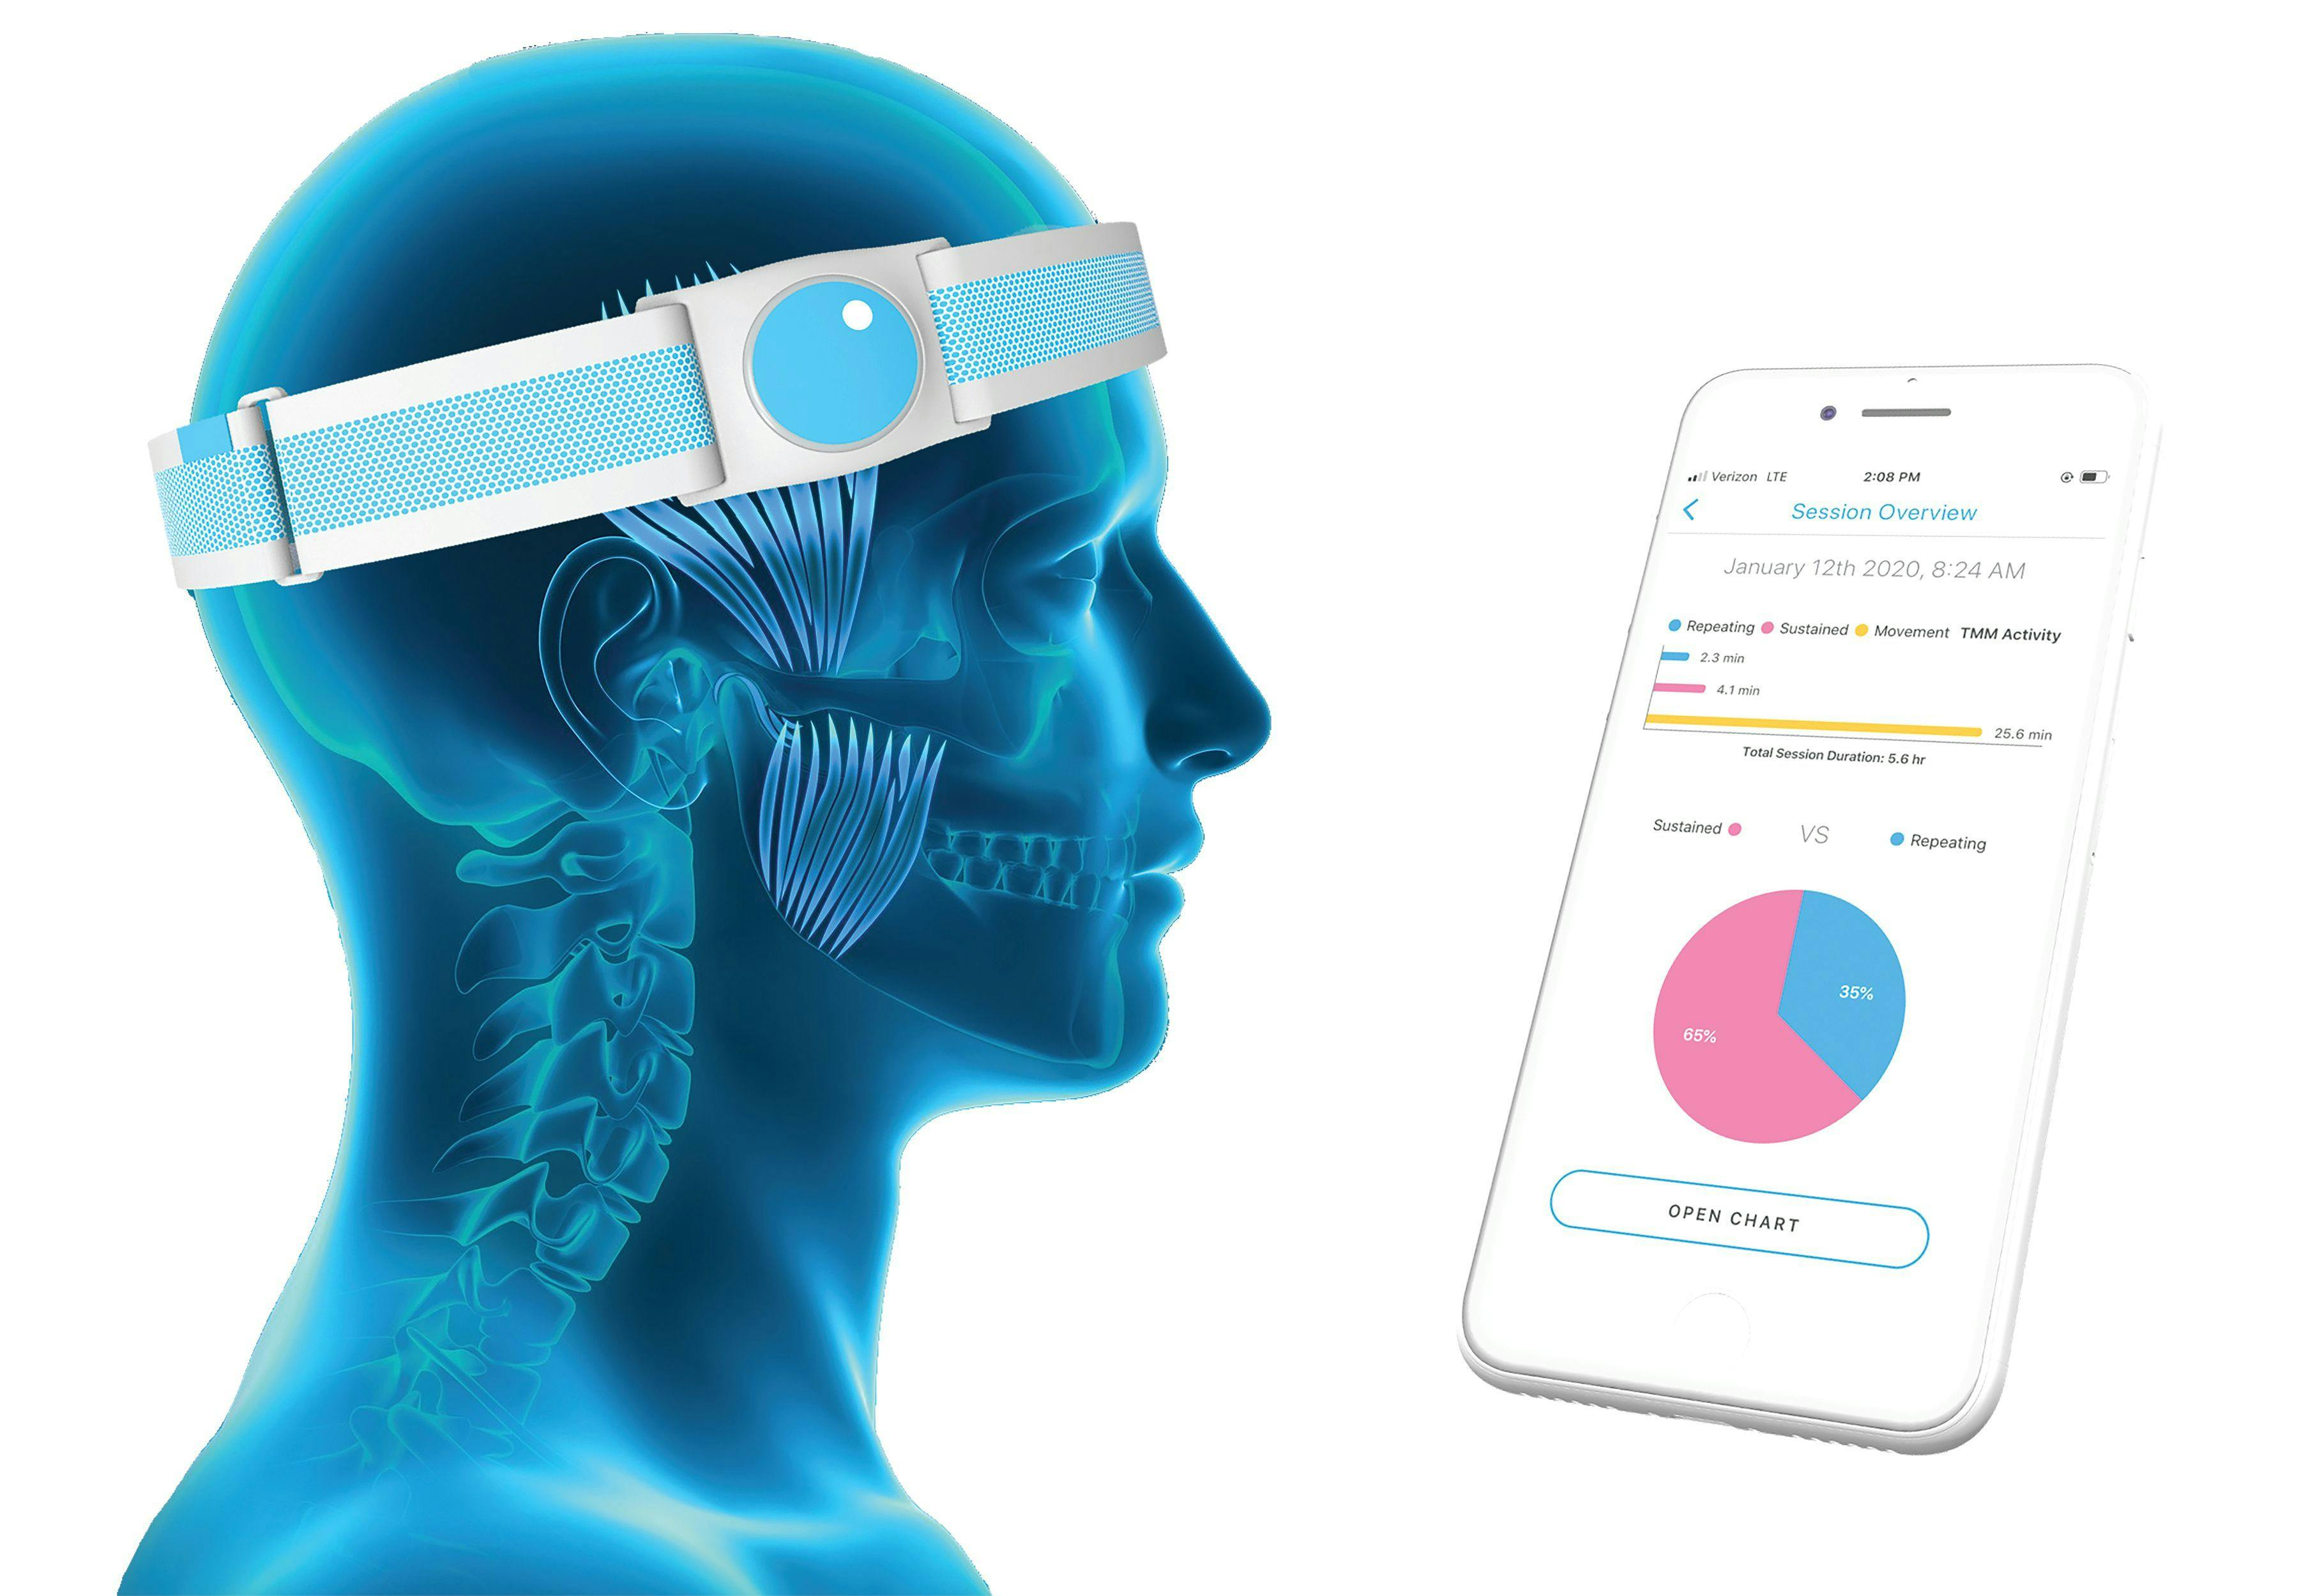 BruxRelief is a wearable AI device that collects bruxism activity while a patient sleeps and records that data in its app.